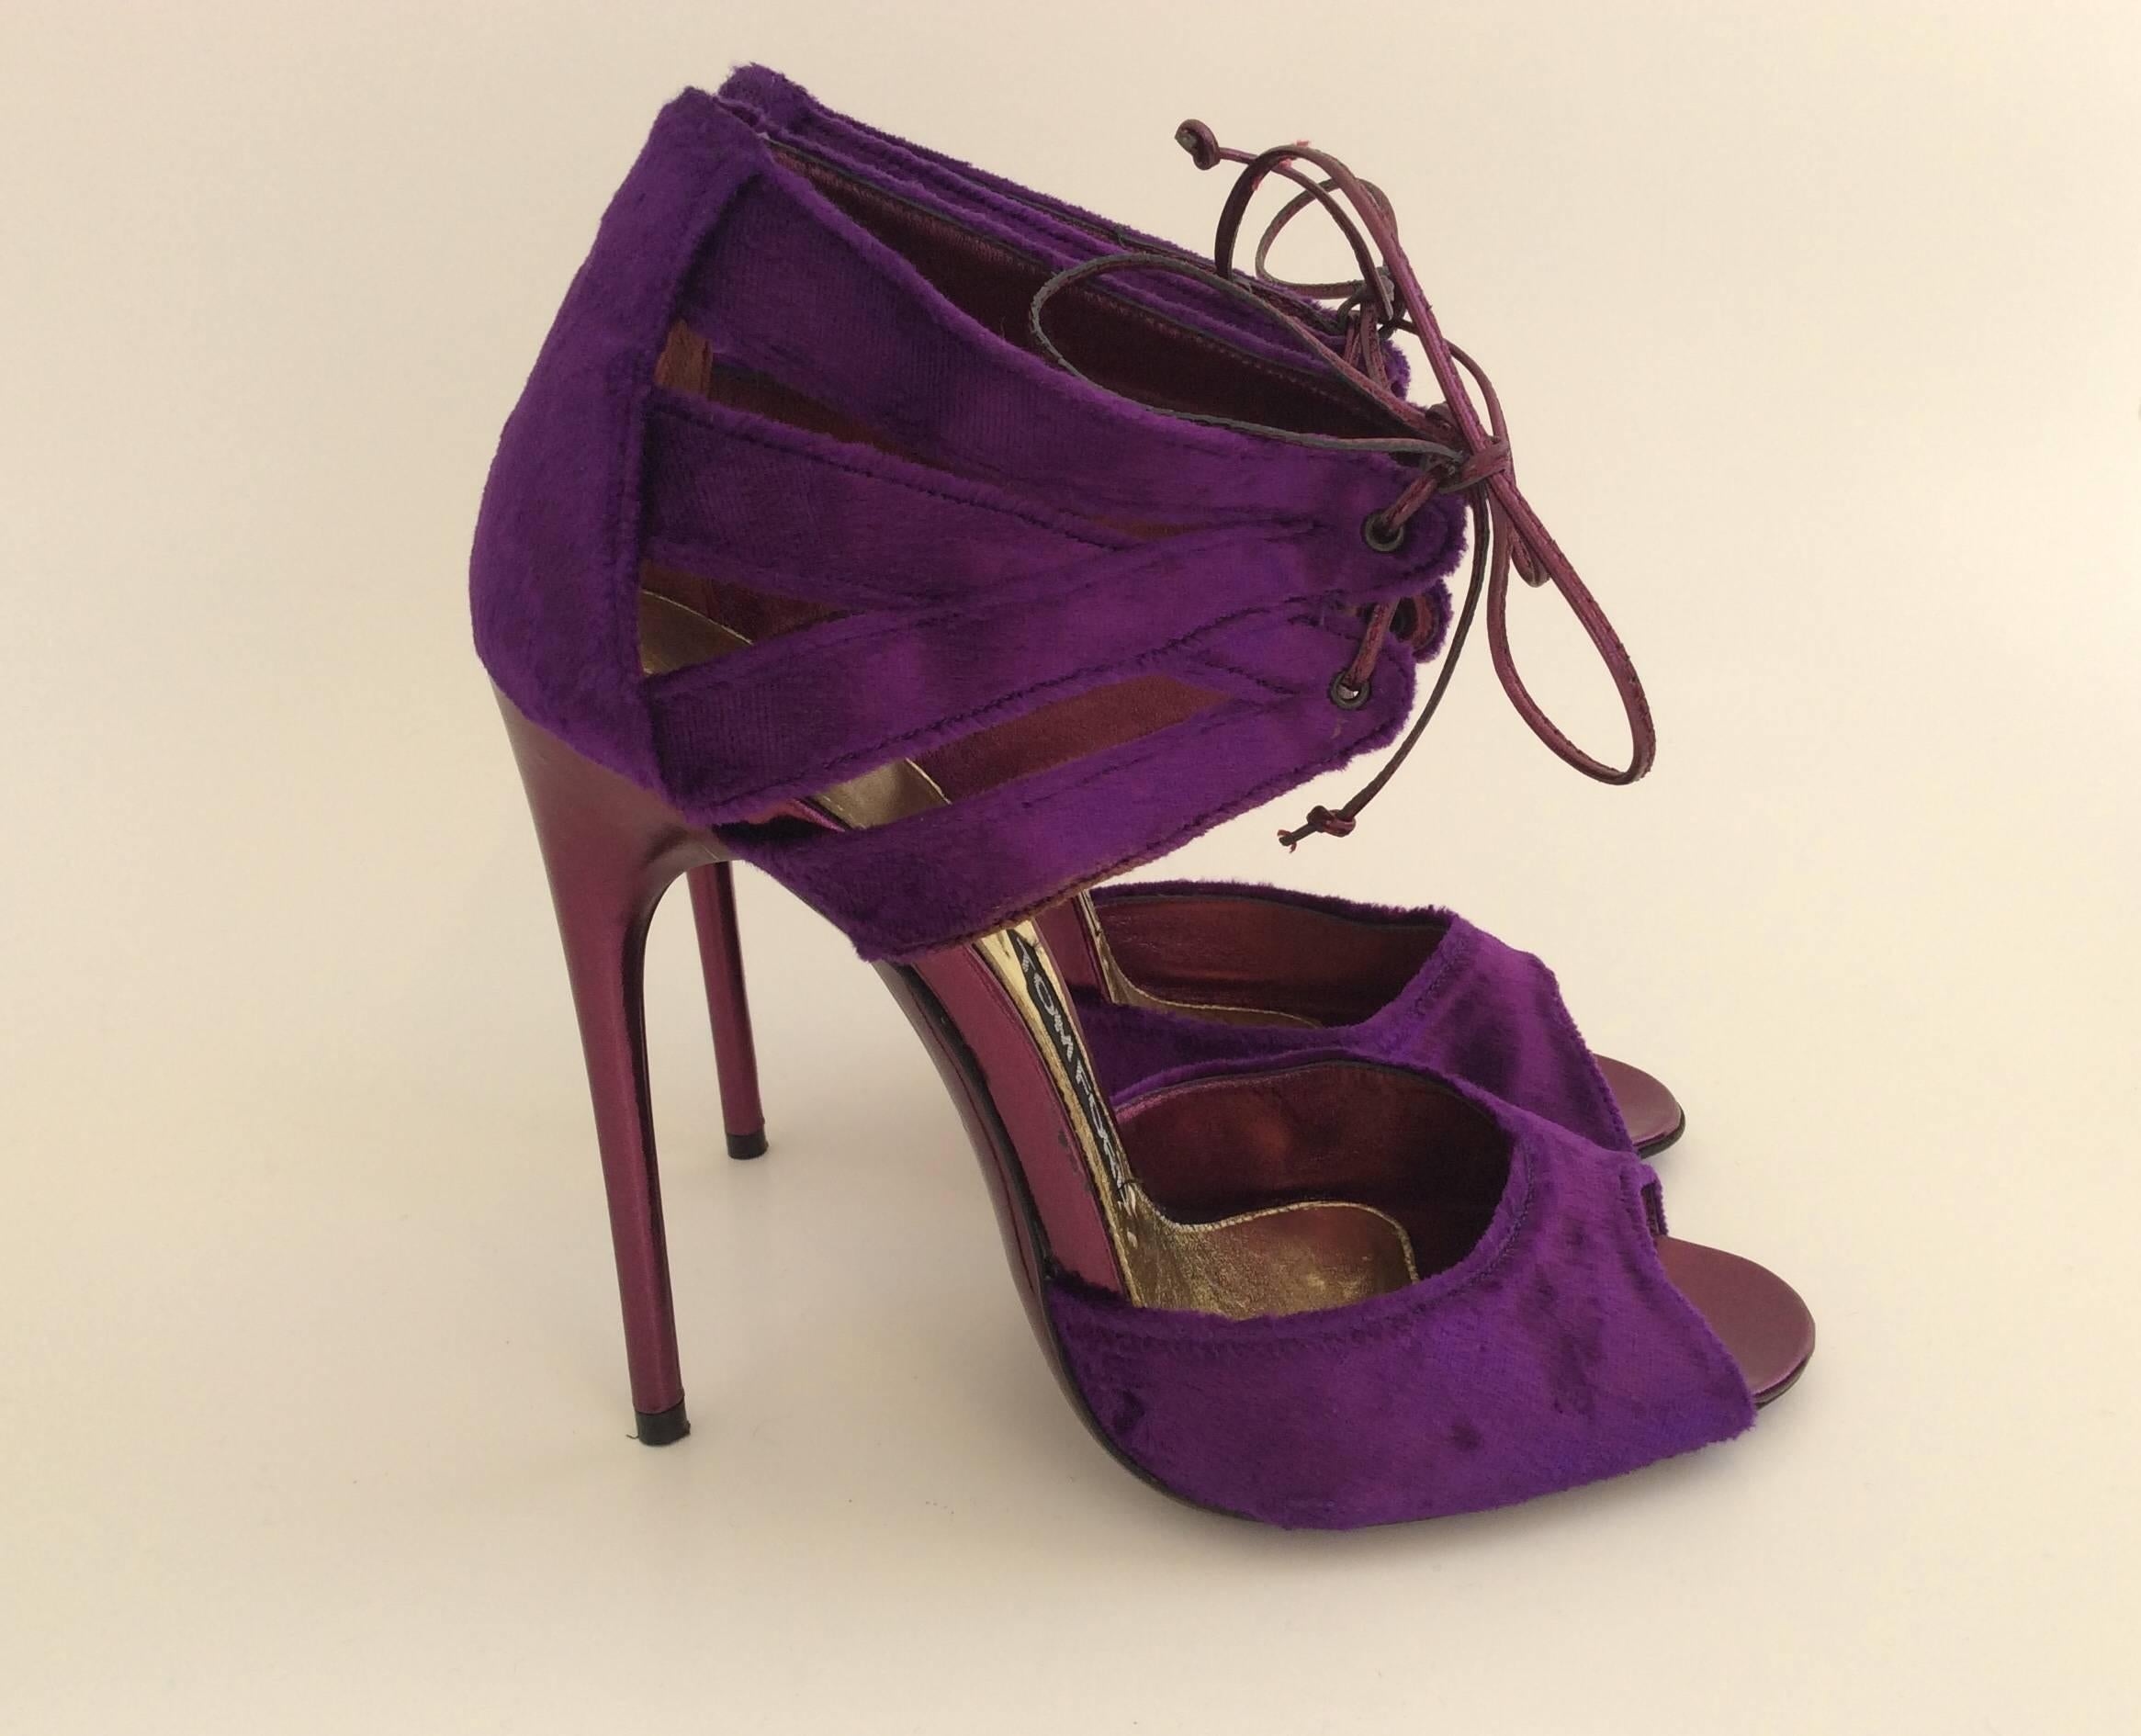 Tom Ford vibrant violet velvet evening sandals. The 5in stiletto heel is covered in metallic magenta leather matching the ties and the soles.